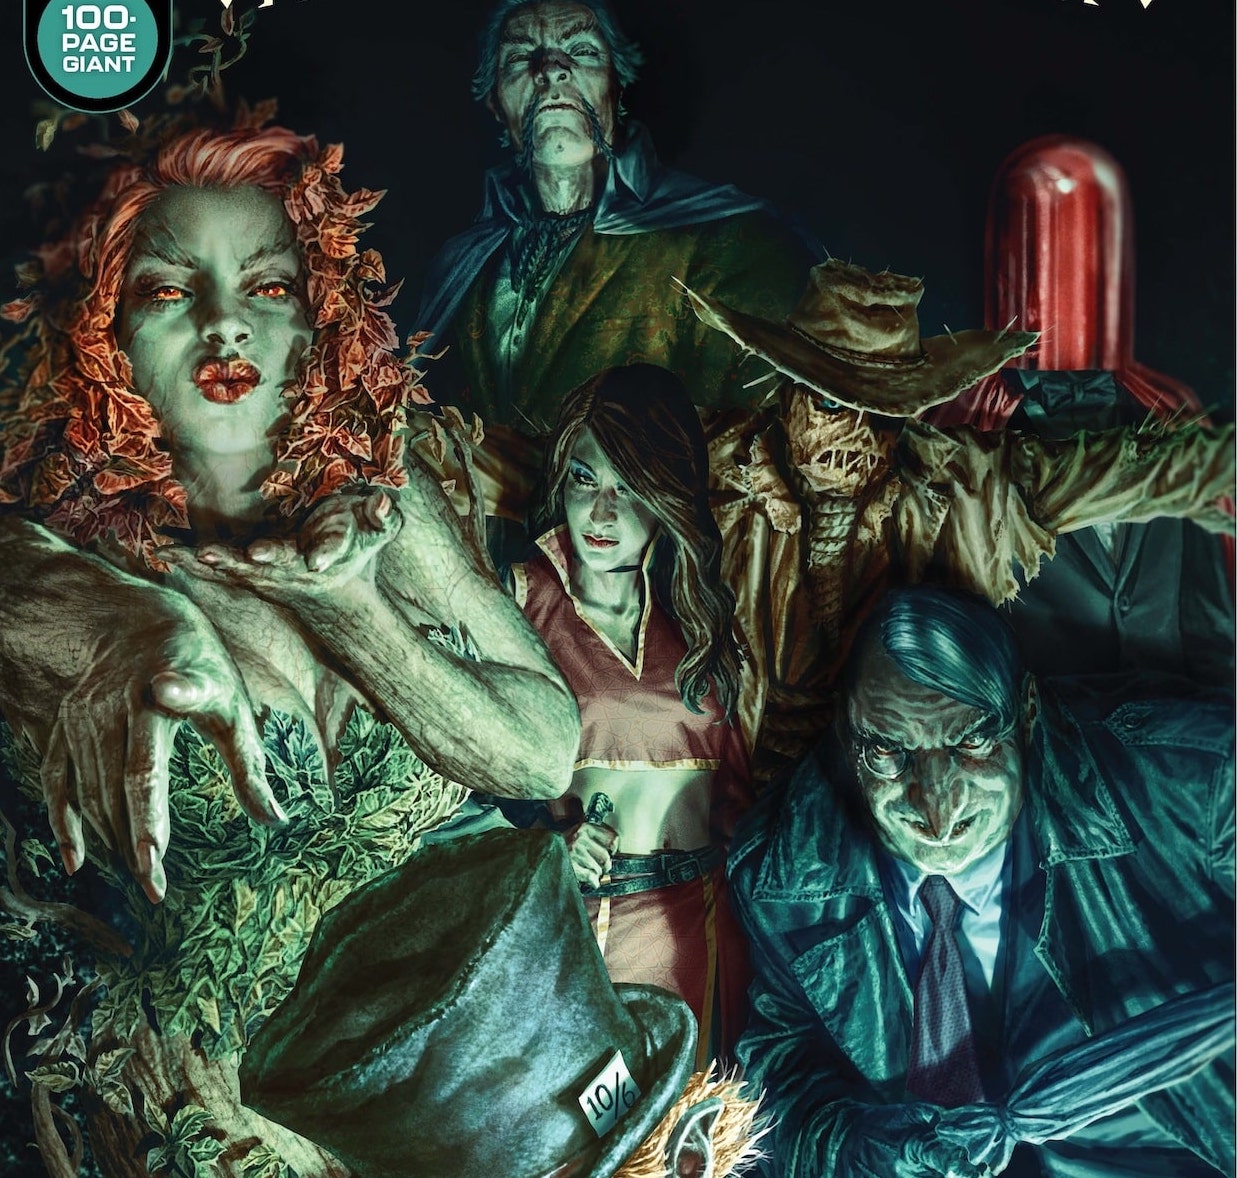 'Gotham City Villains Anniversary Giant' #1 is must-read